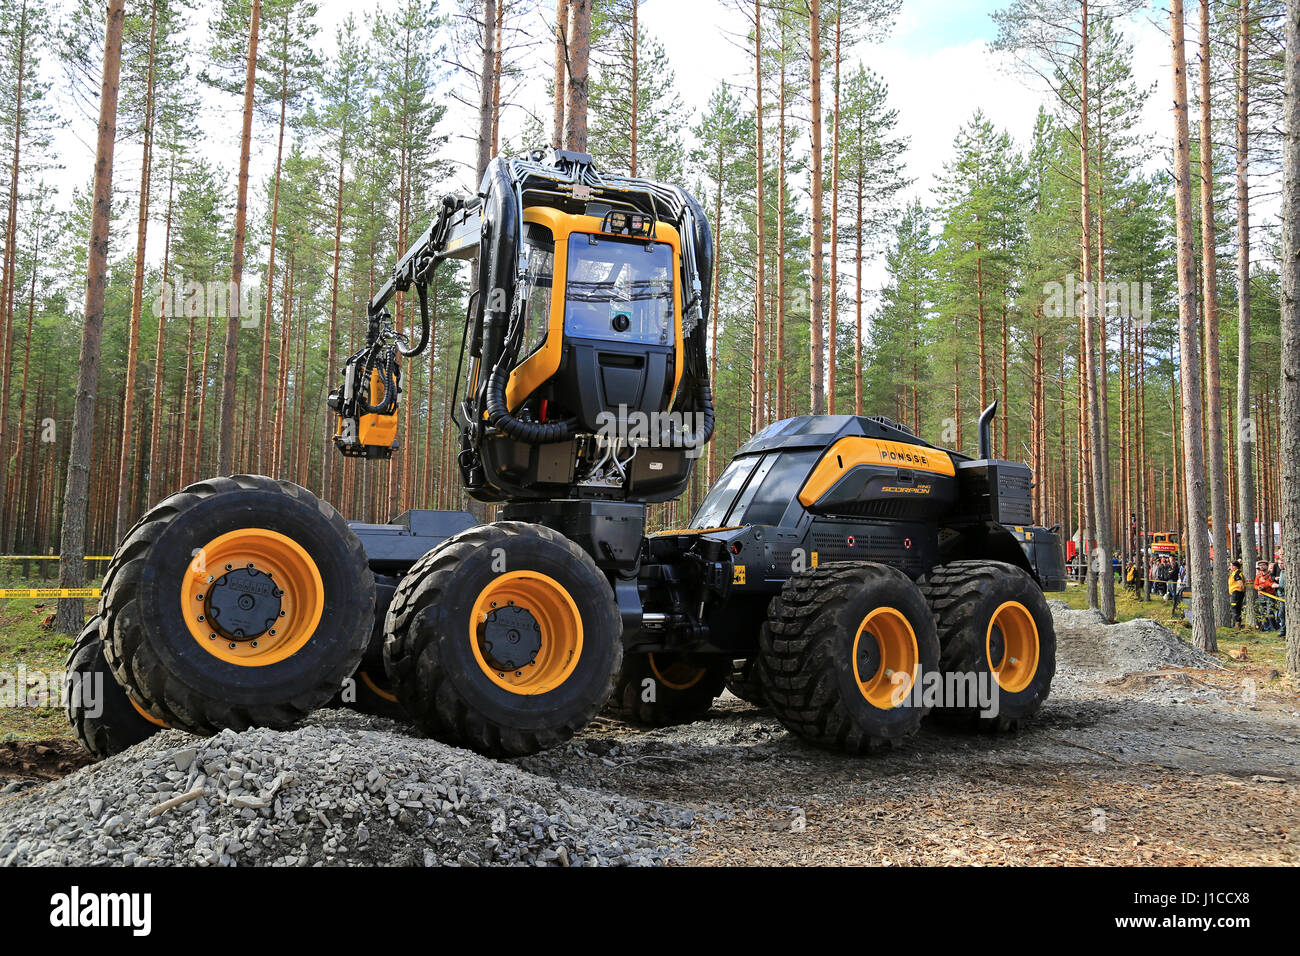 JAMSA, FINLAND - SEPTEMBER 1, 2016: Ponsse presents harvester Scorpion King in a work demonstration on the heavy machinery exhibition FinnMETKO 2016 i Stock Photo